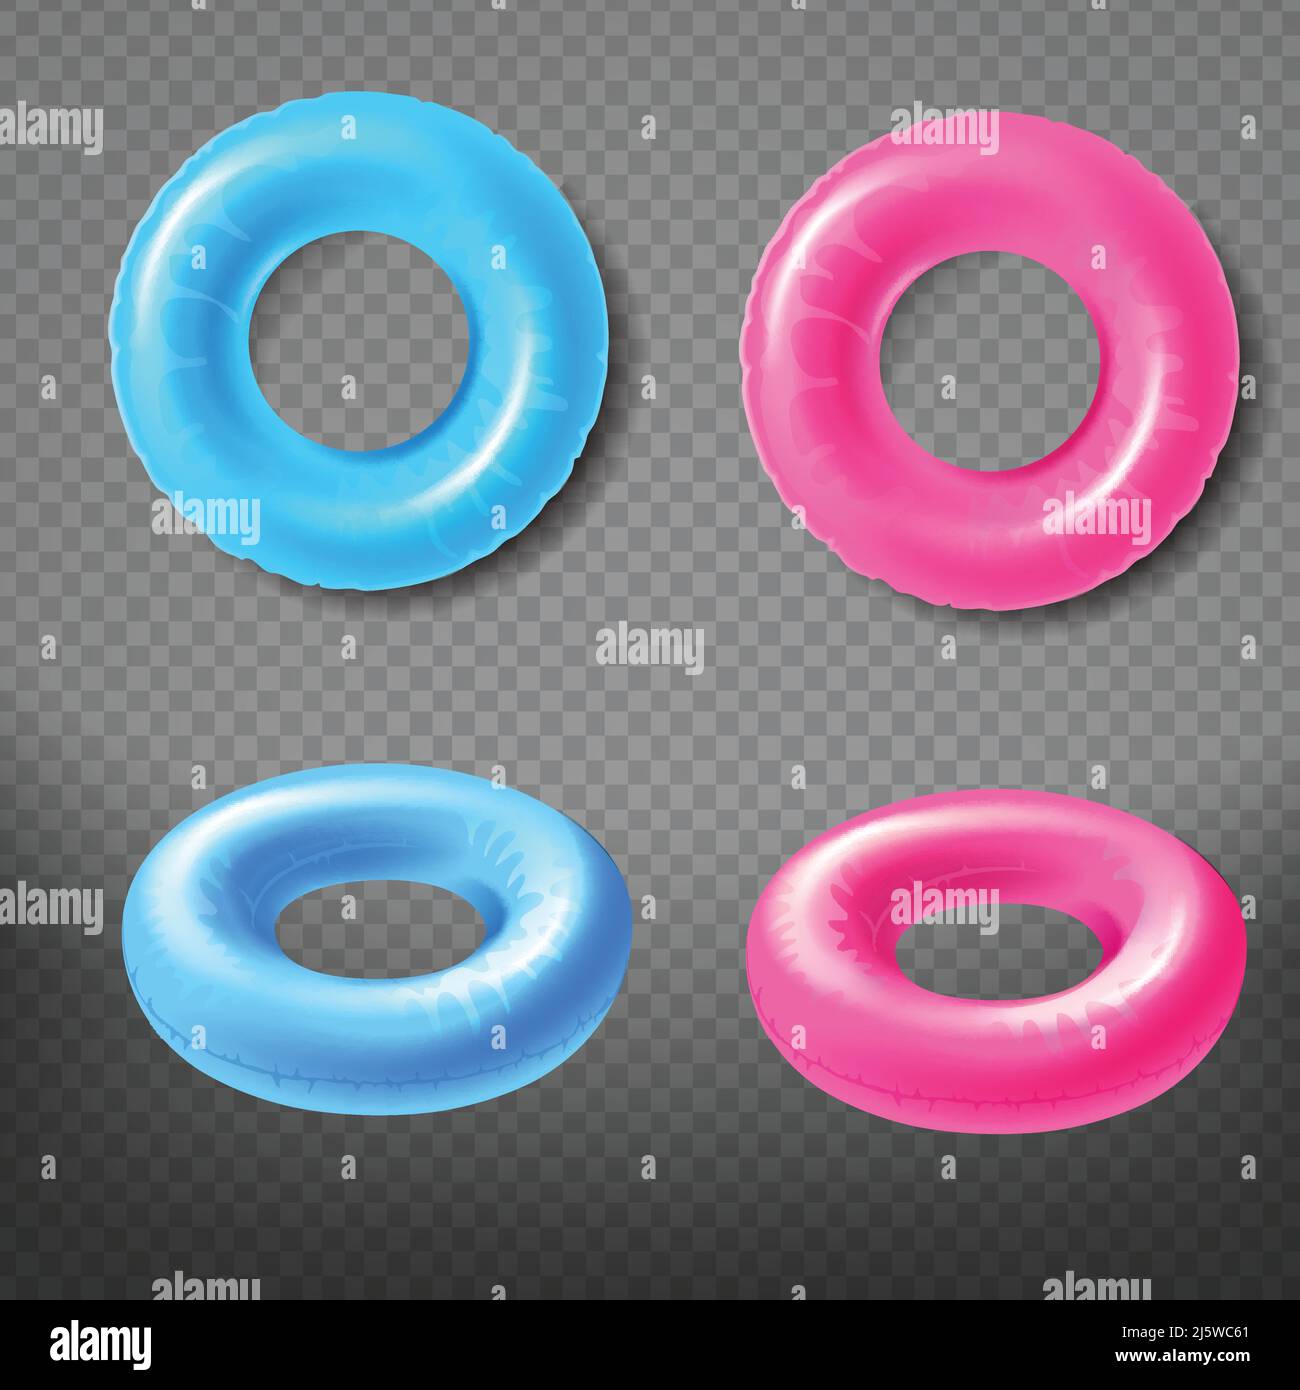 Blue and pink inflatable rings top, front view 3d realistic vector icons set isolated on transparent background. Water park swimming pool toy illustra Stock Vector